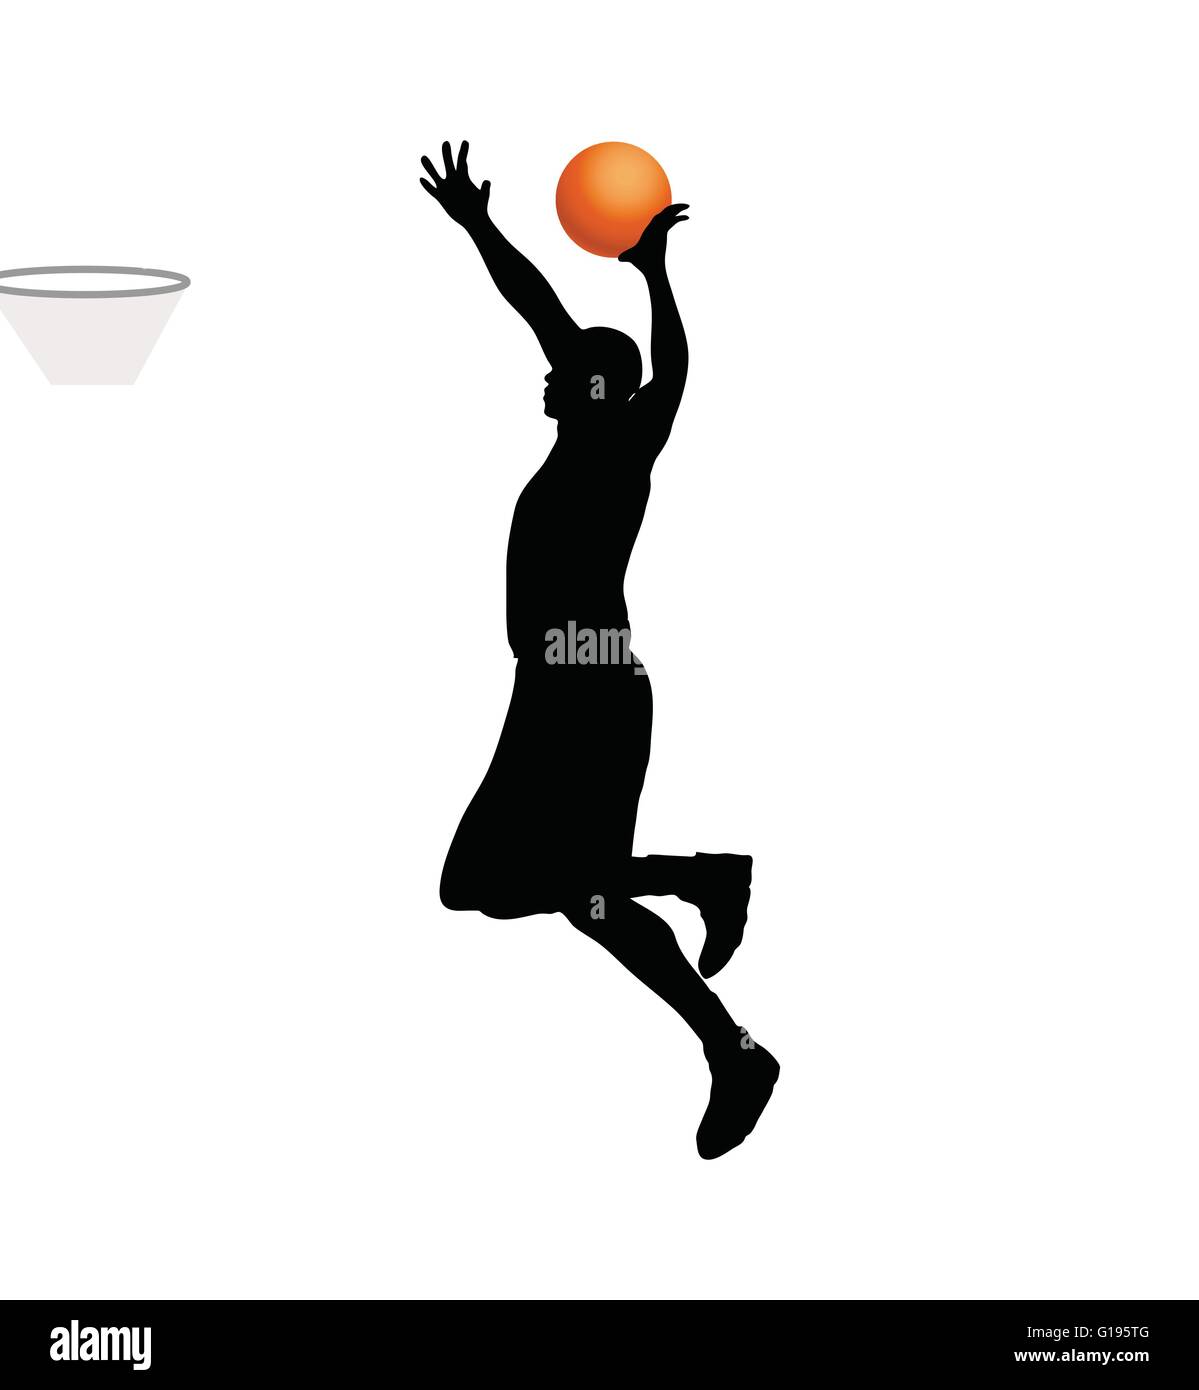 Vector Image - basketball player man silhouette isolated on white ...